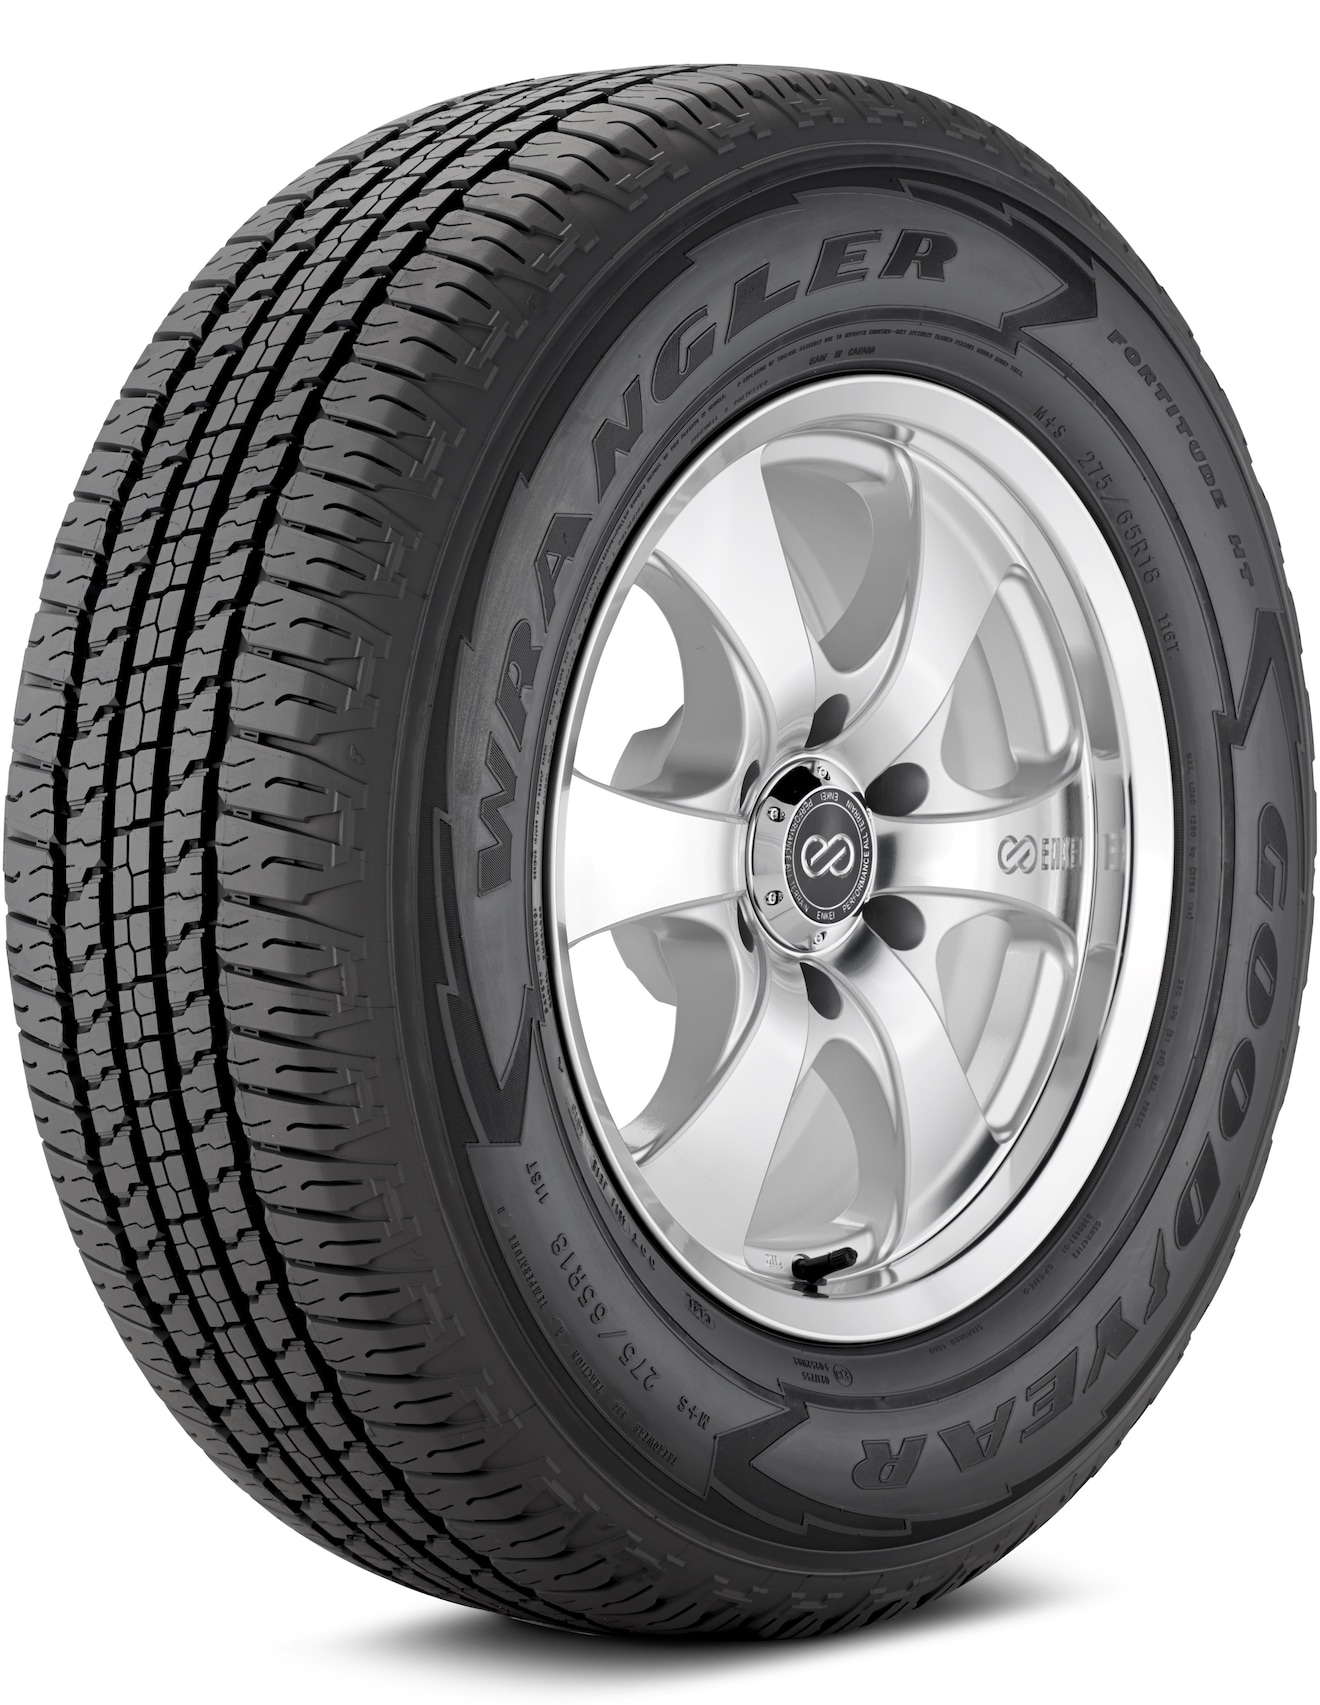 Need New Tires This Year. Discover the Goodyear Wrangler SR-A in 2023